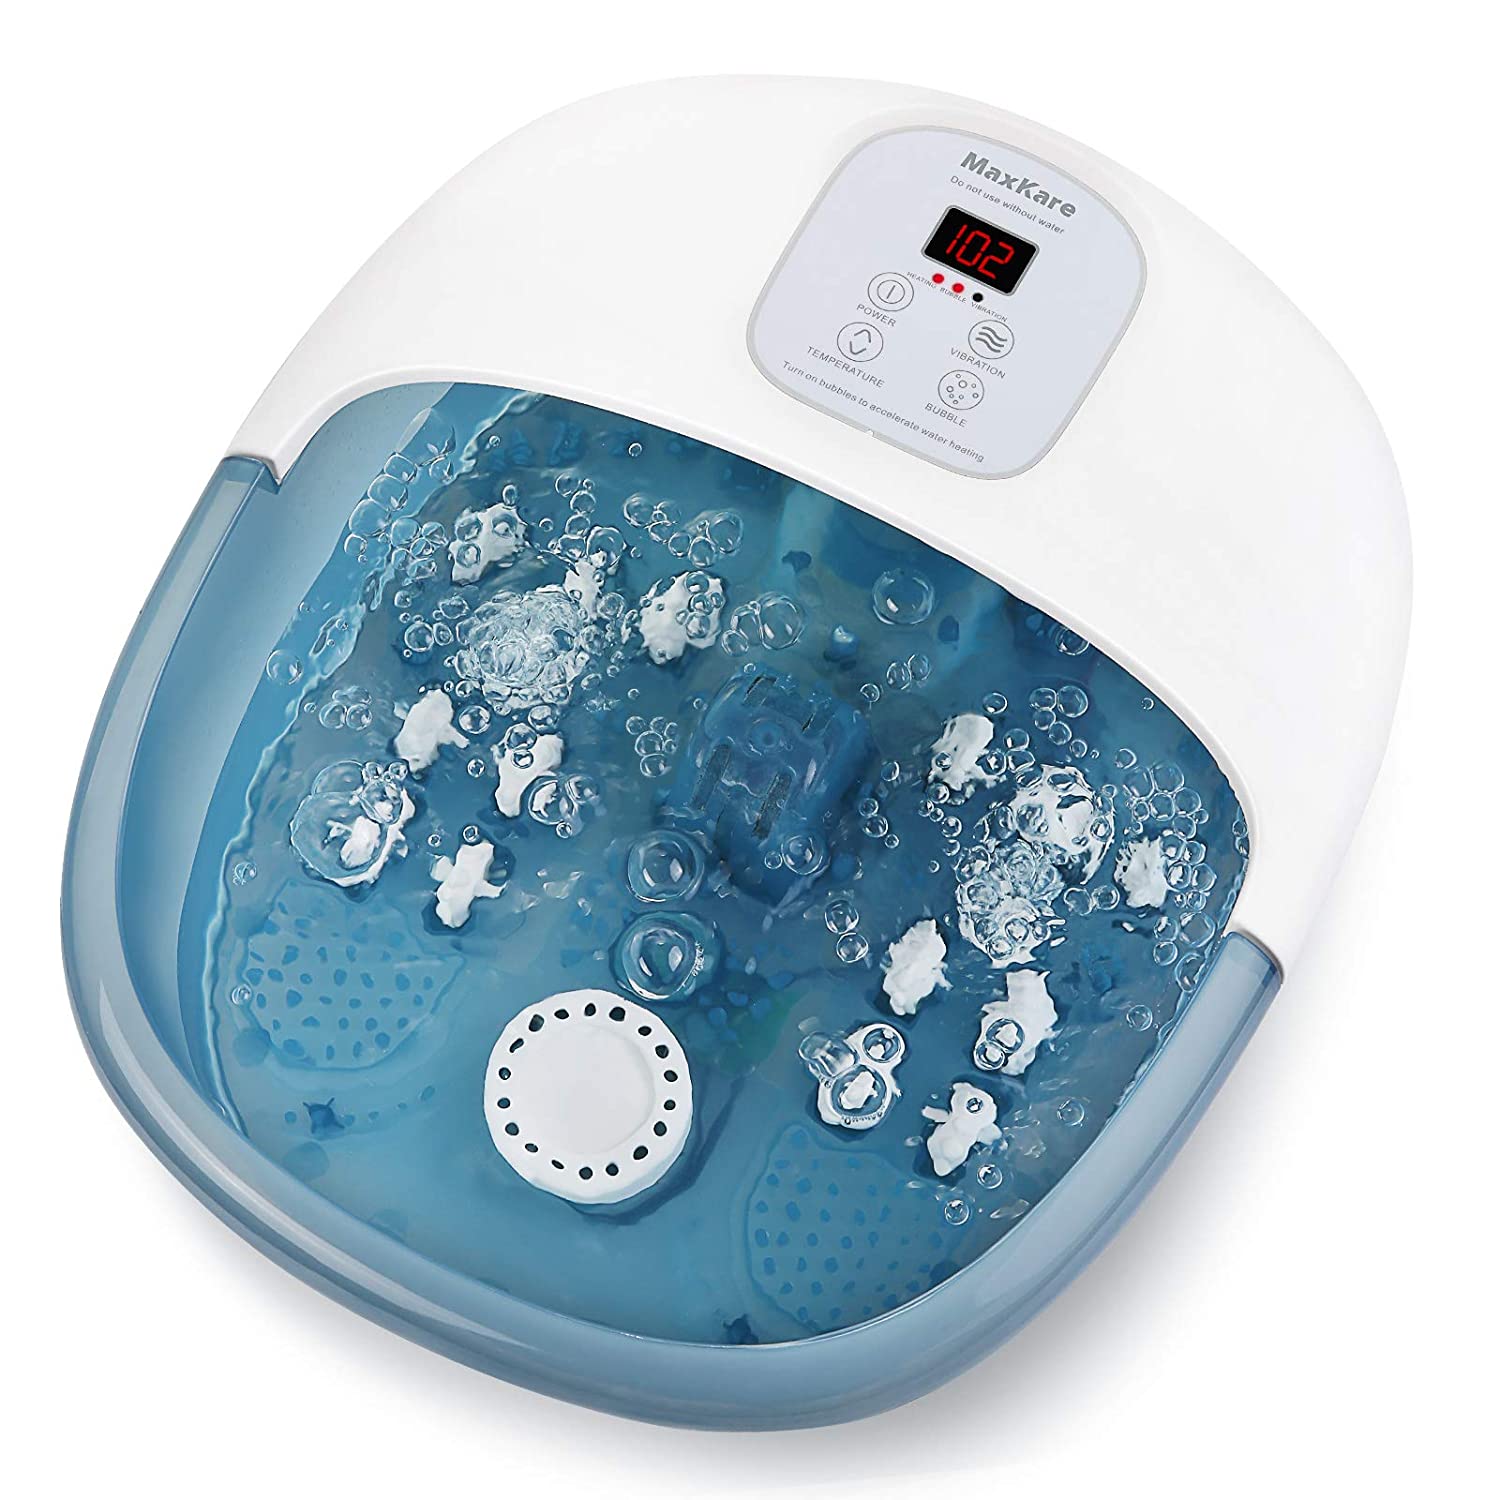 16 Perfect Mother's Day Gift Ideas foot spa